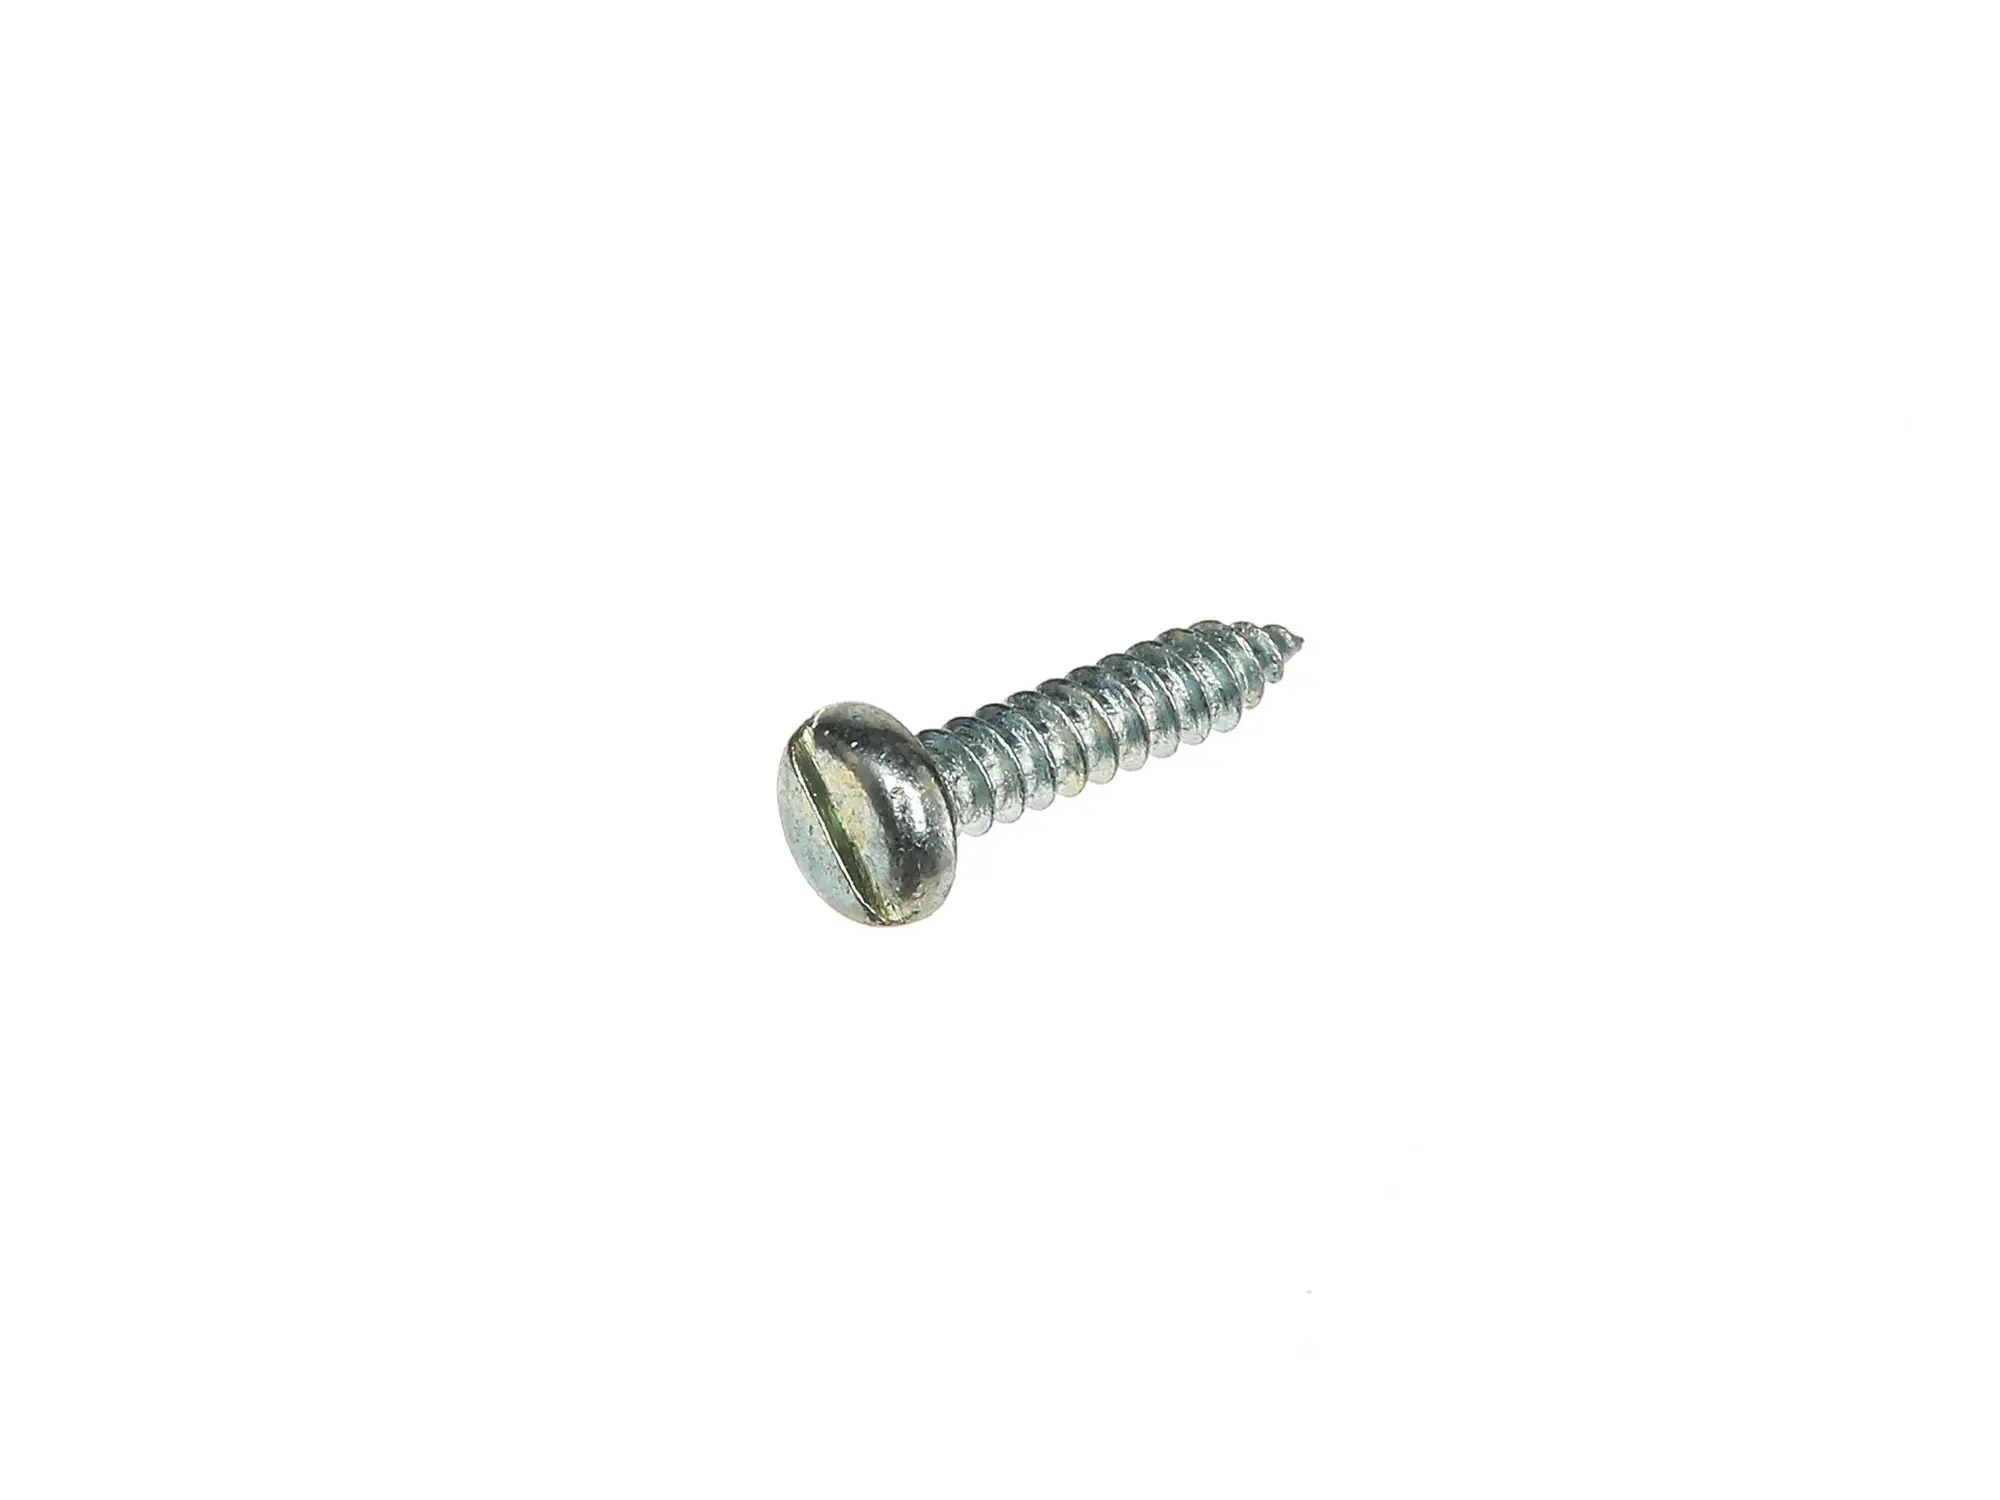 Cylinder tapping screw, slotted 2.9x9.5 - DIN7971, Item no: 10063467 - Image 1